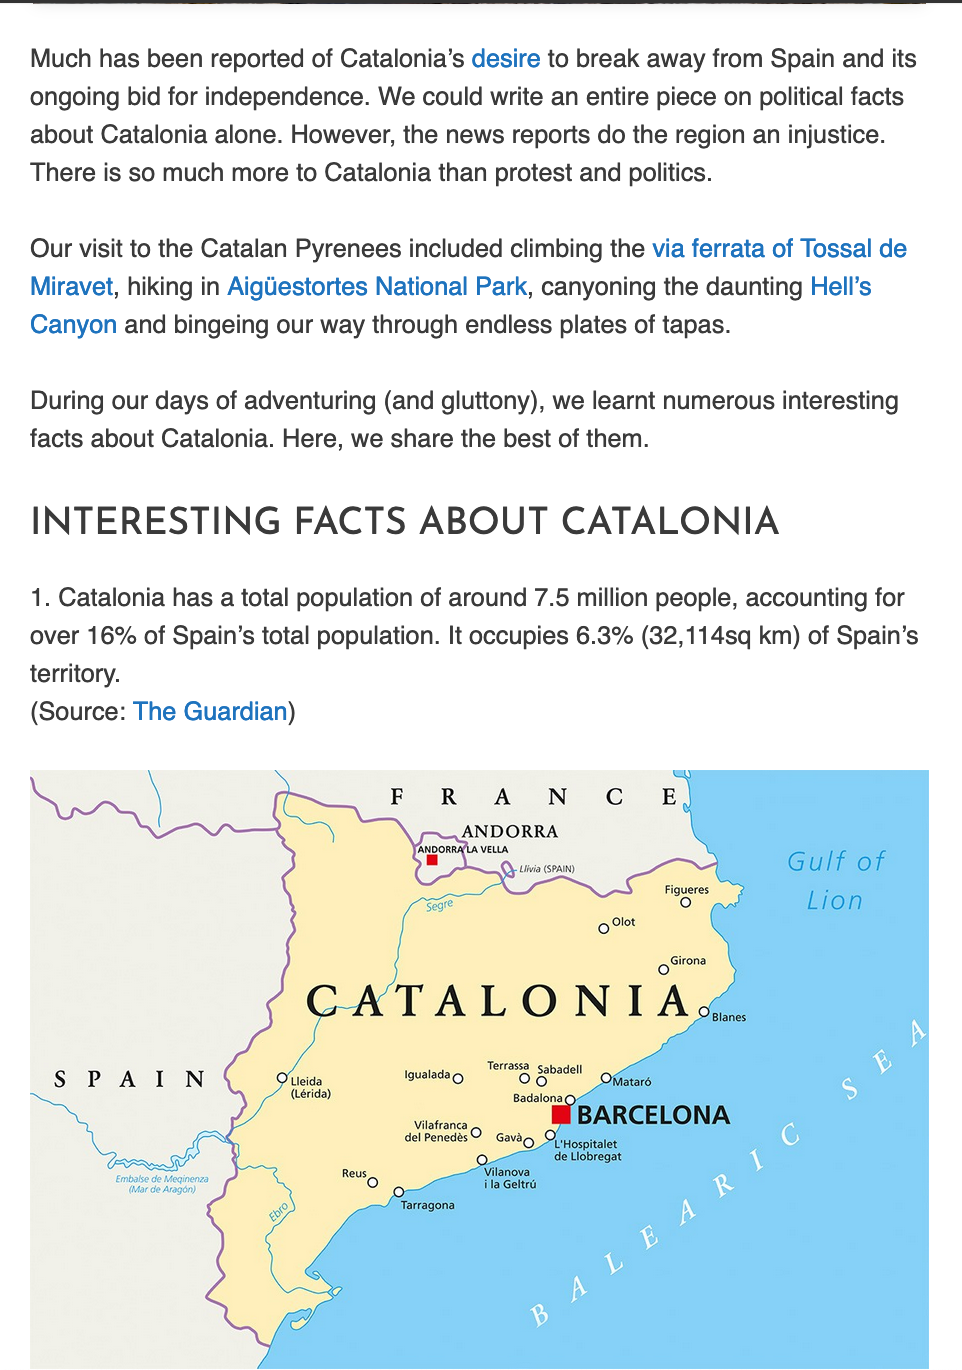 17 interesting facts about Catalonia